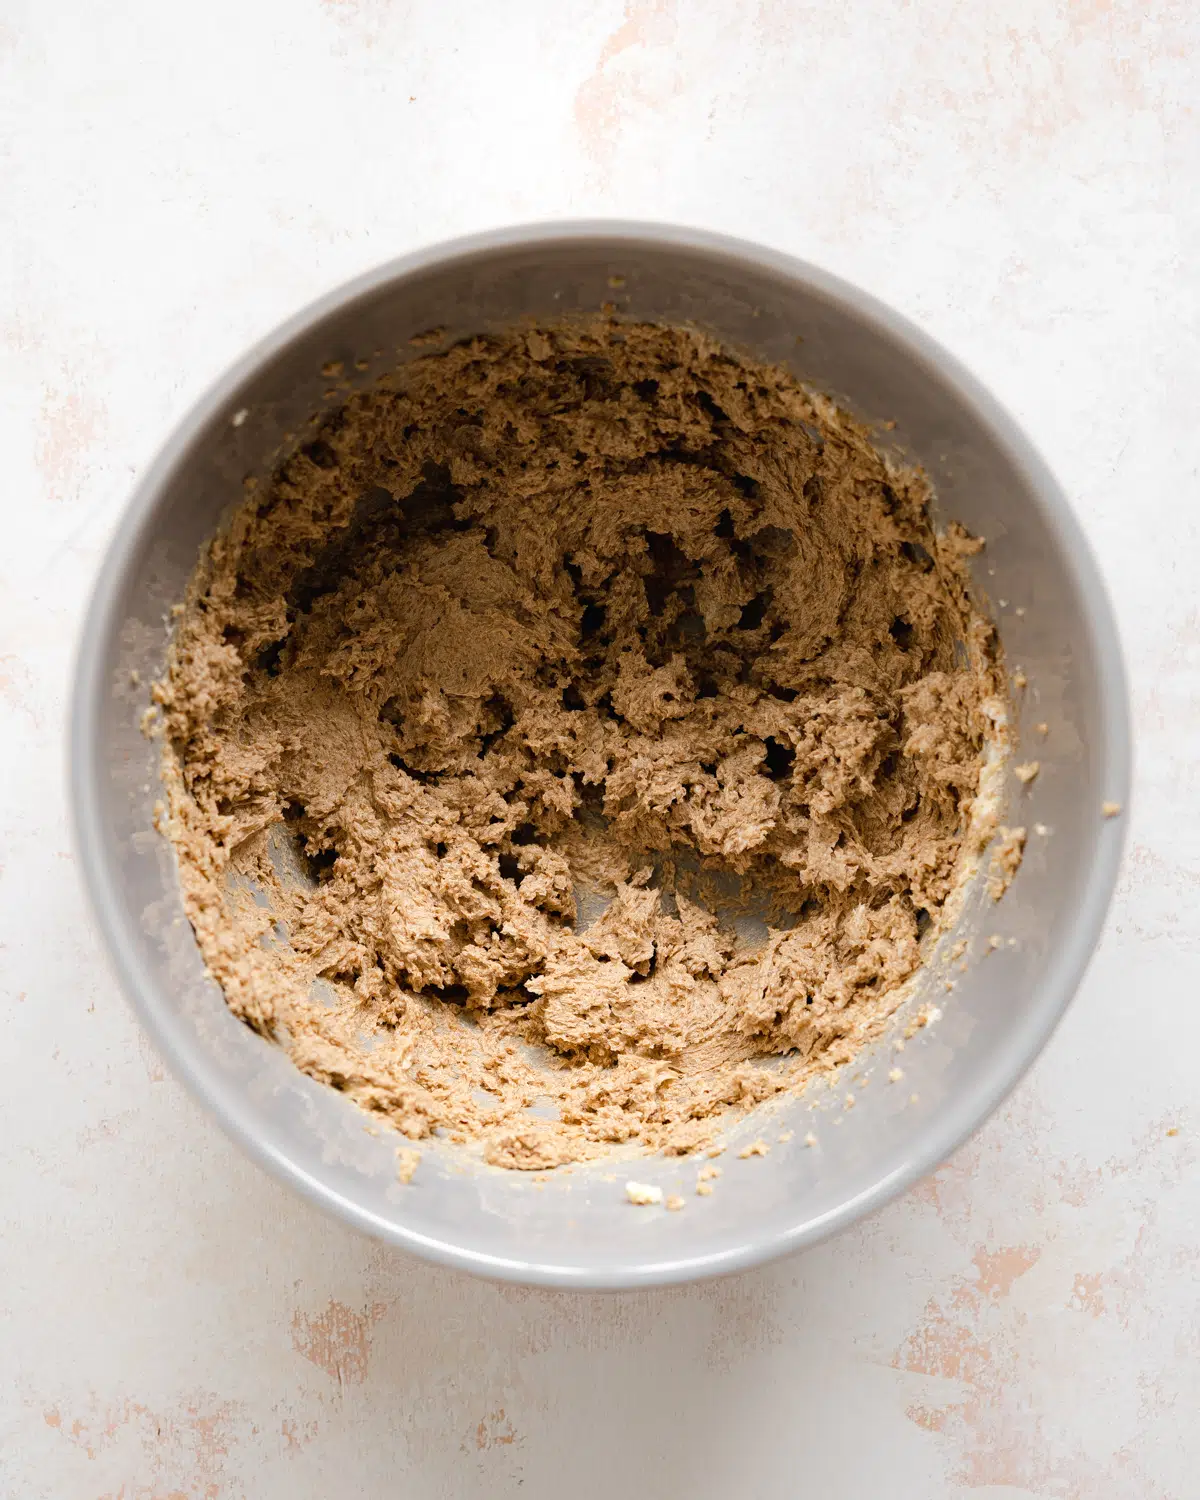 ingredients for speculaas creamed together in a bowl.